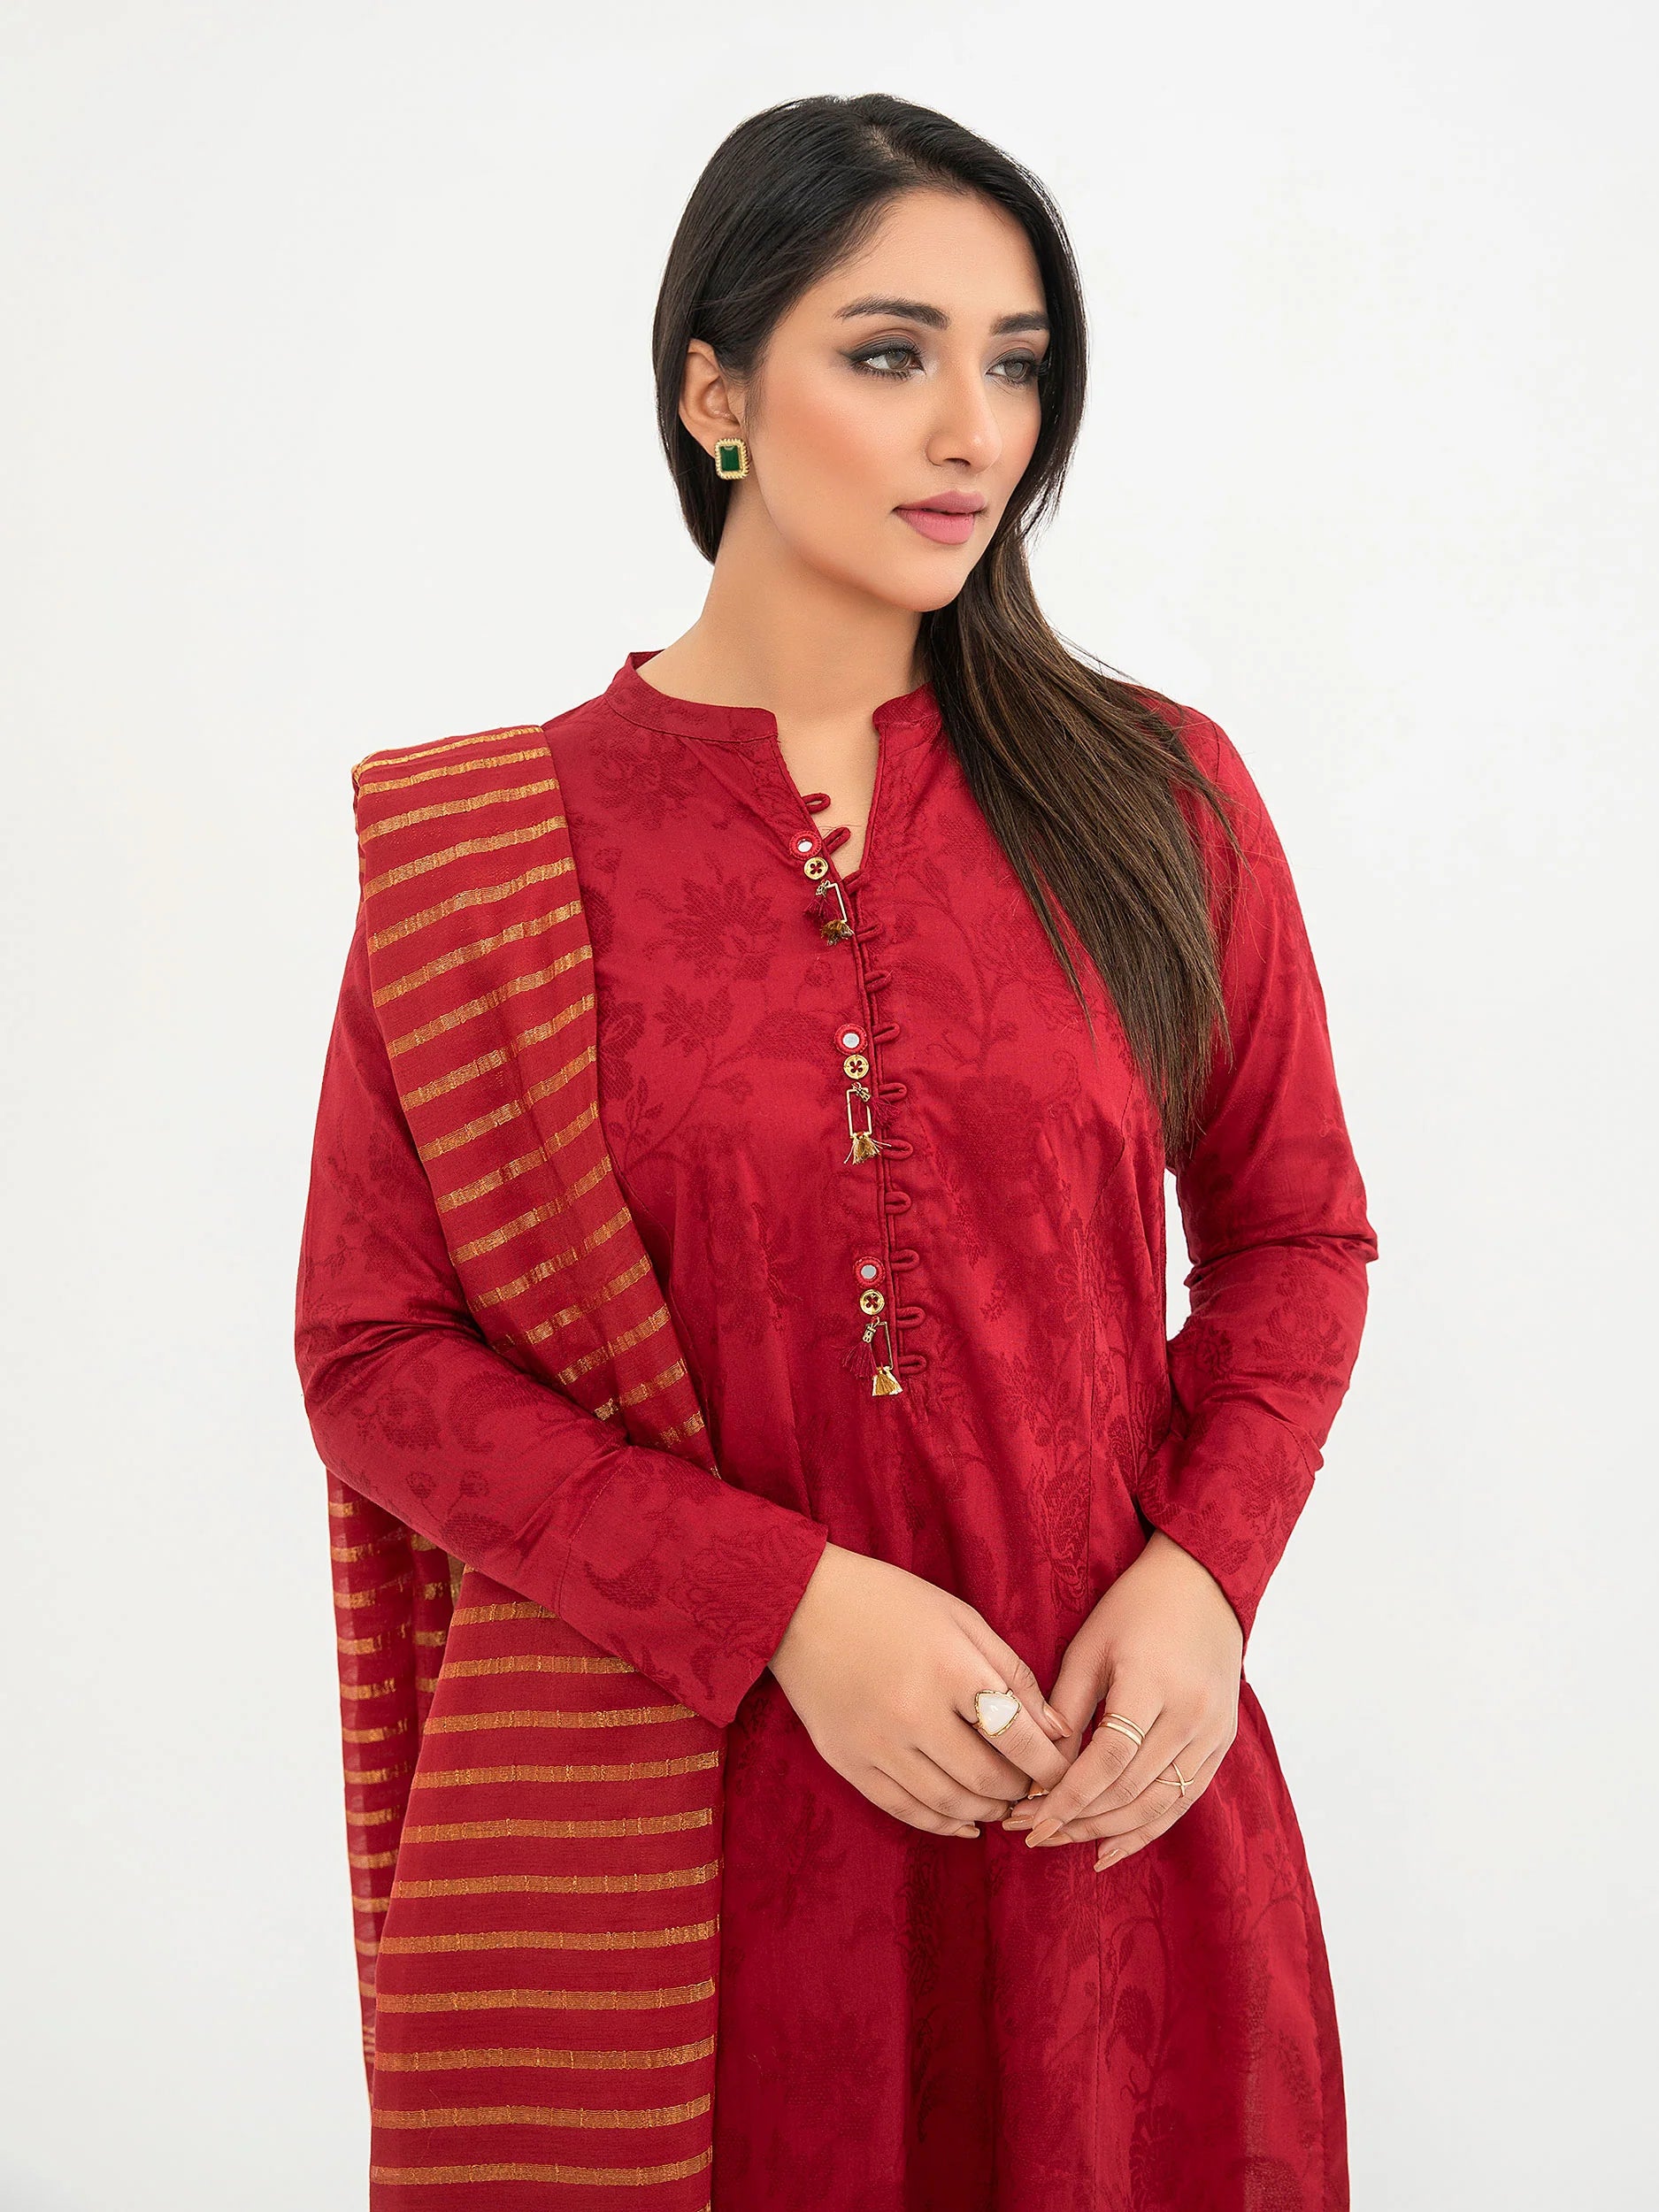 Limelight Red Jacquard Embroidered 3-Piece Suit (P8484SU)